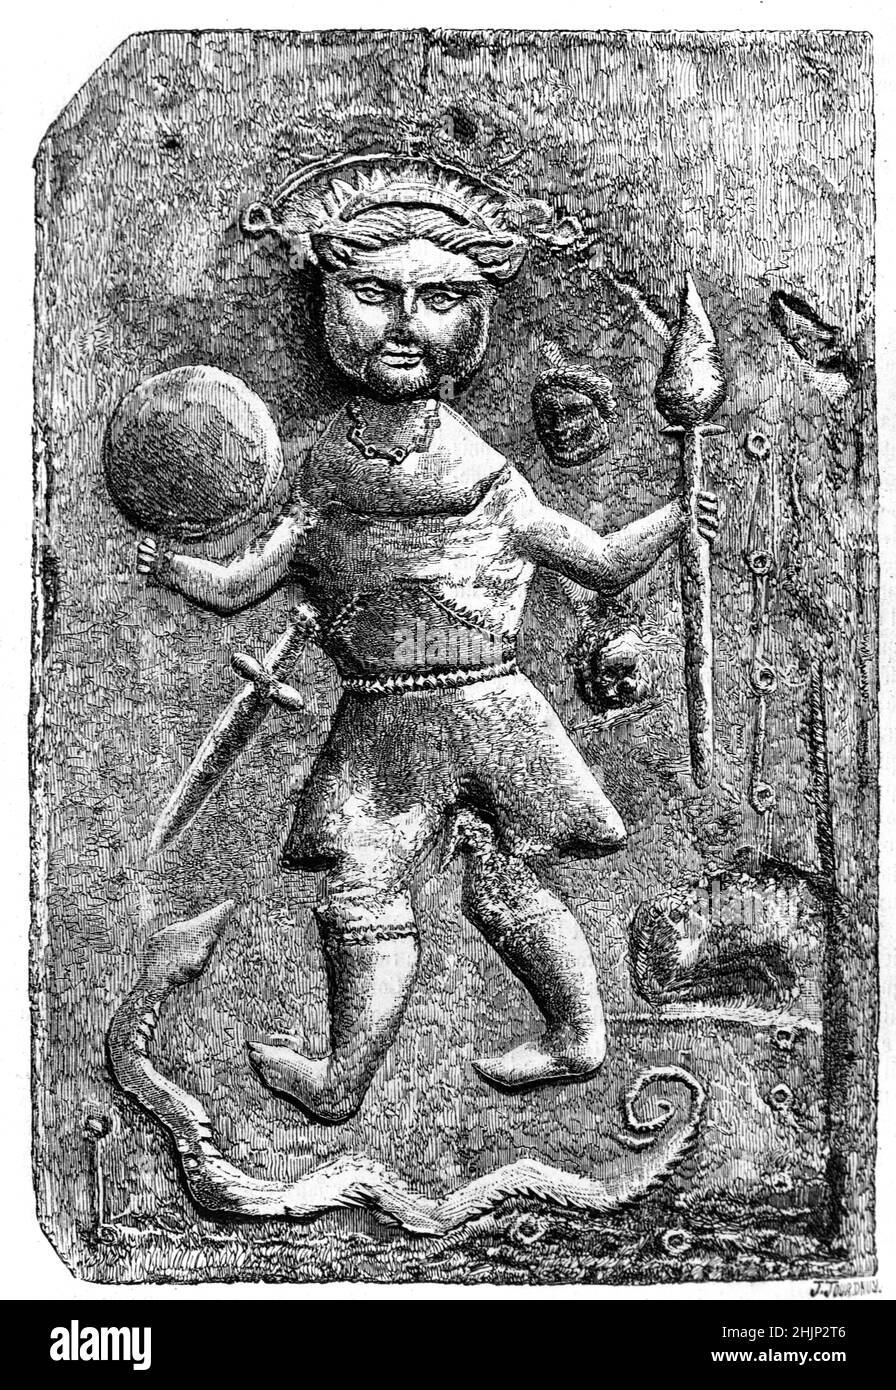 Antique Stone Bas-Relief showing a Strange Figure that has been variously interpreted as a Pagan God, possibly Tyllinus, a provincial rural impression of Christ, an Ancient Gaul, Gallic Soldier or Warrior carrying a Spear, Dagger and possibly a Shield, or a Hunter surrounded by a snake and severed heads. Made of brick 42cmx27cm, dated between c3rd and 5th centuries AD, the sculpture was discovered on the line of a Roman road near Issoire in Auvergne France. Vintage Illustration or Engraving 1865 Stock Photo